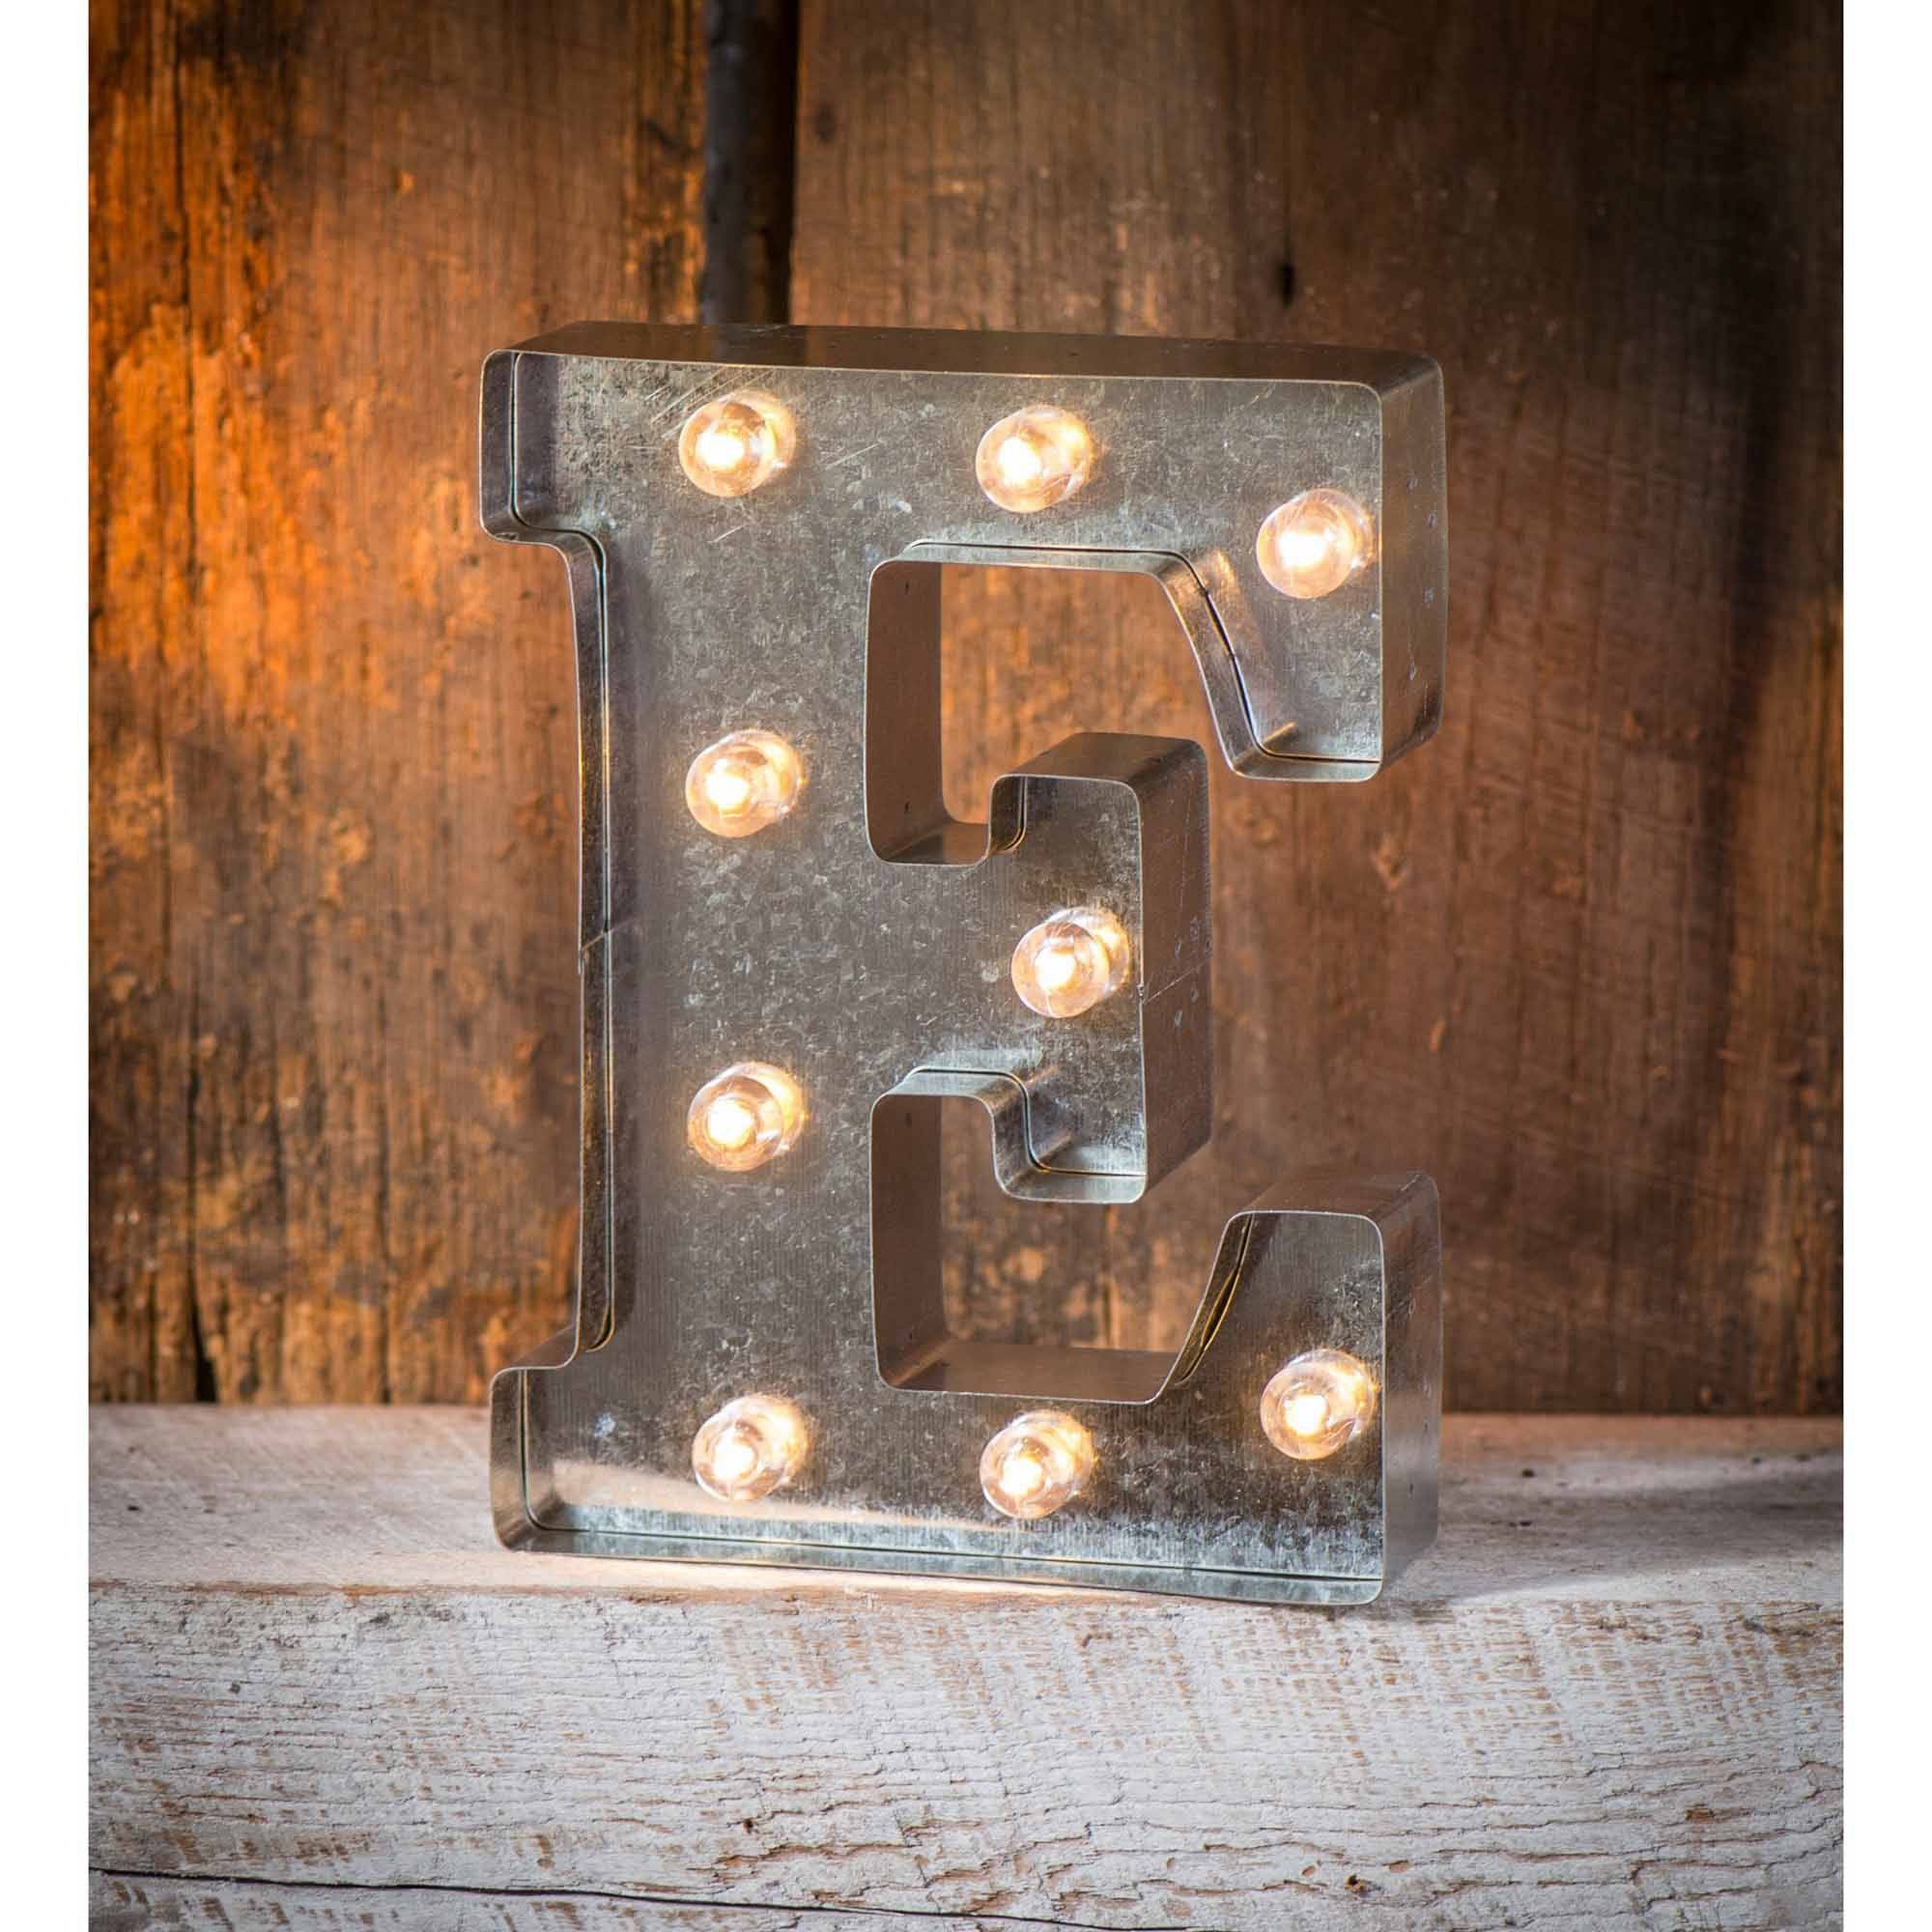 Marquee Letters that are Lite with Timers Light Up Marquee Letter E Walmart